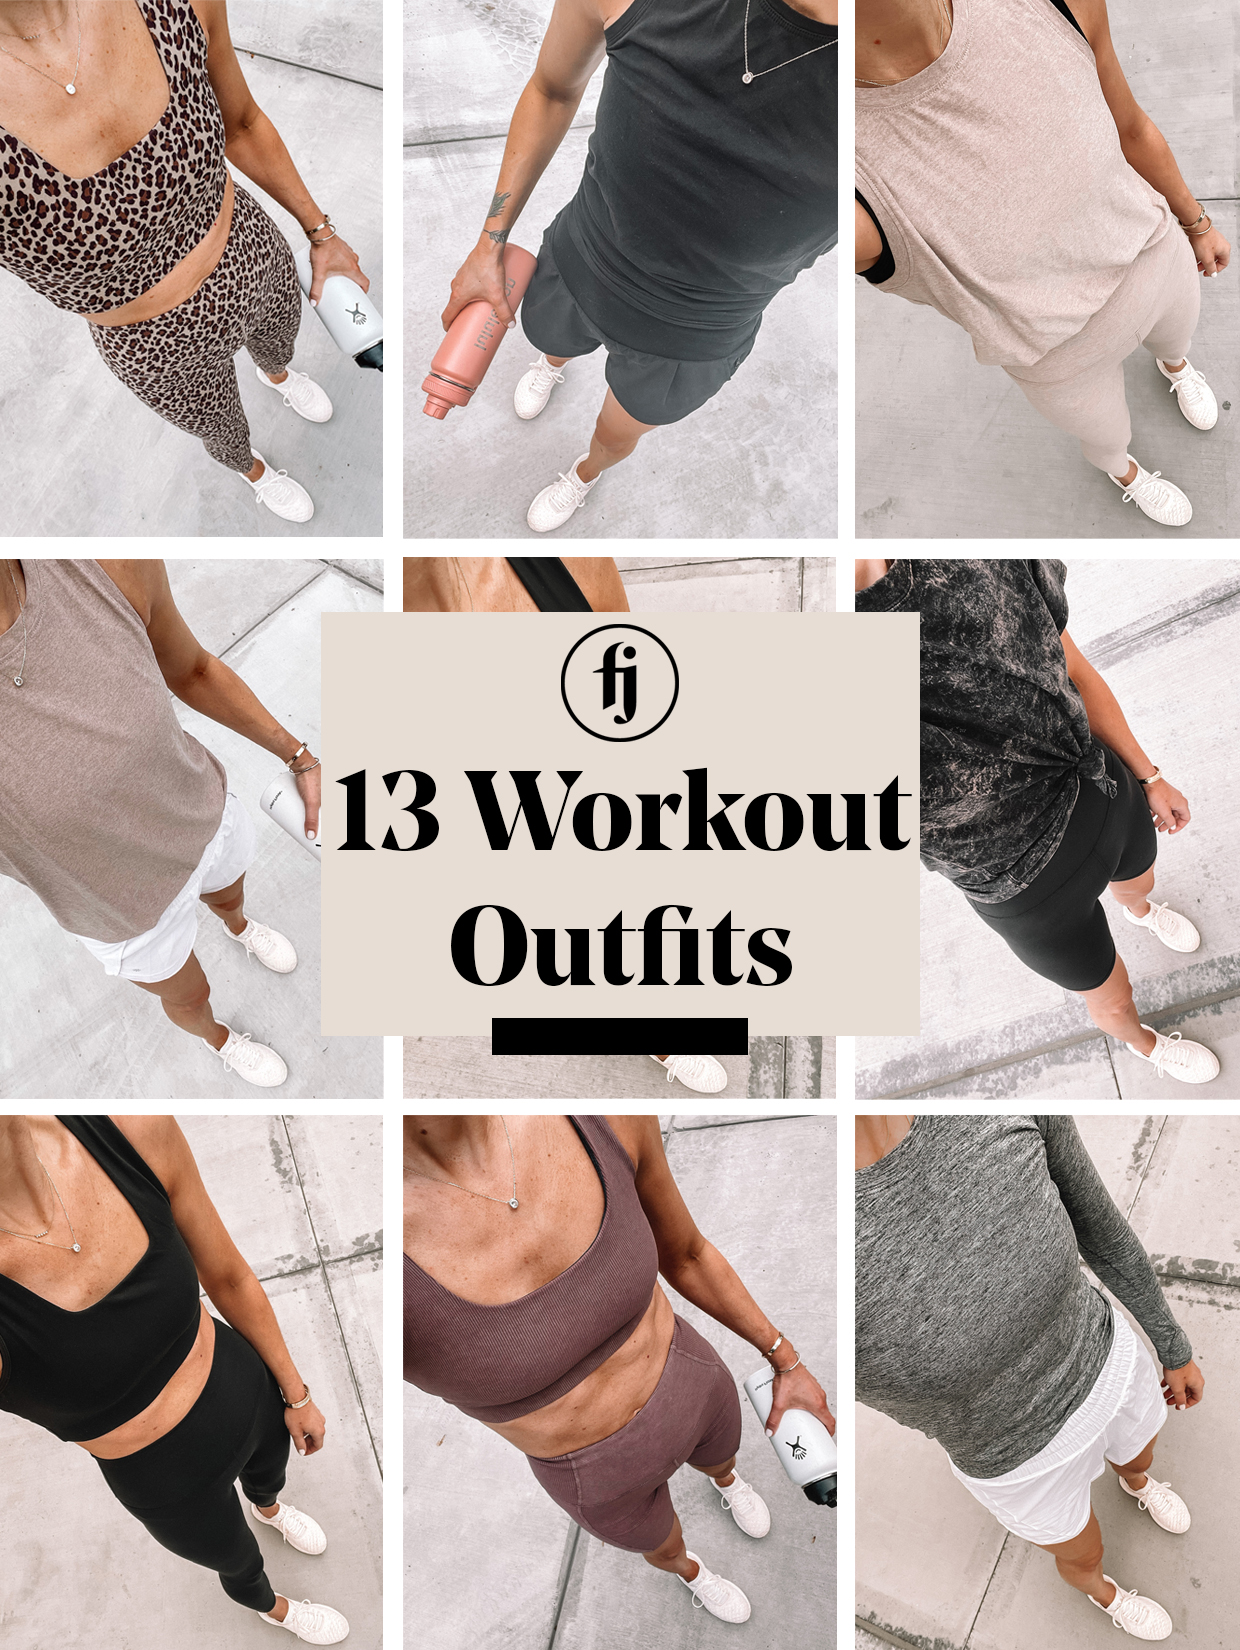 Unique Workout Outfit Ideas that Will Inspire You to Exercise